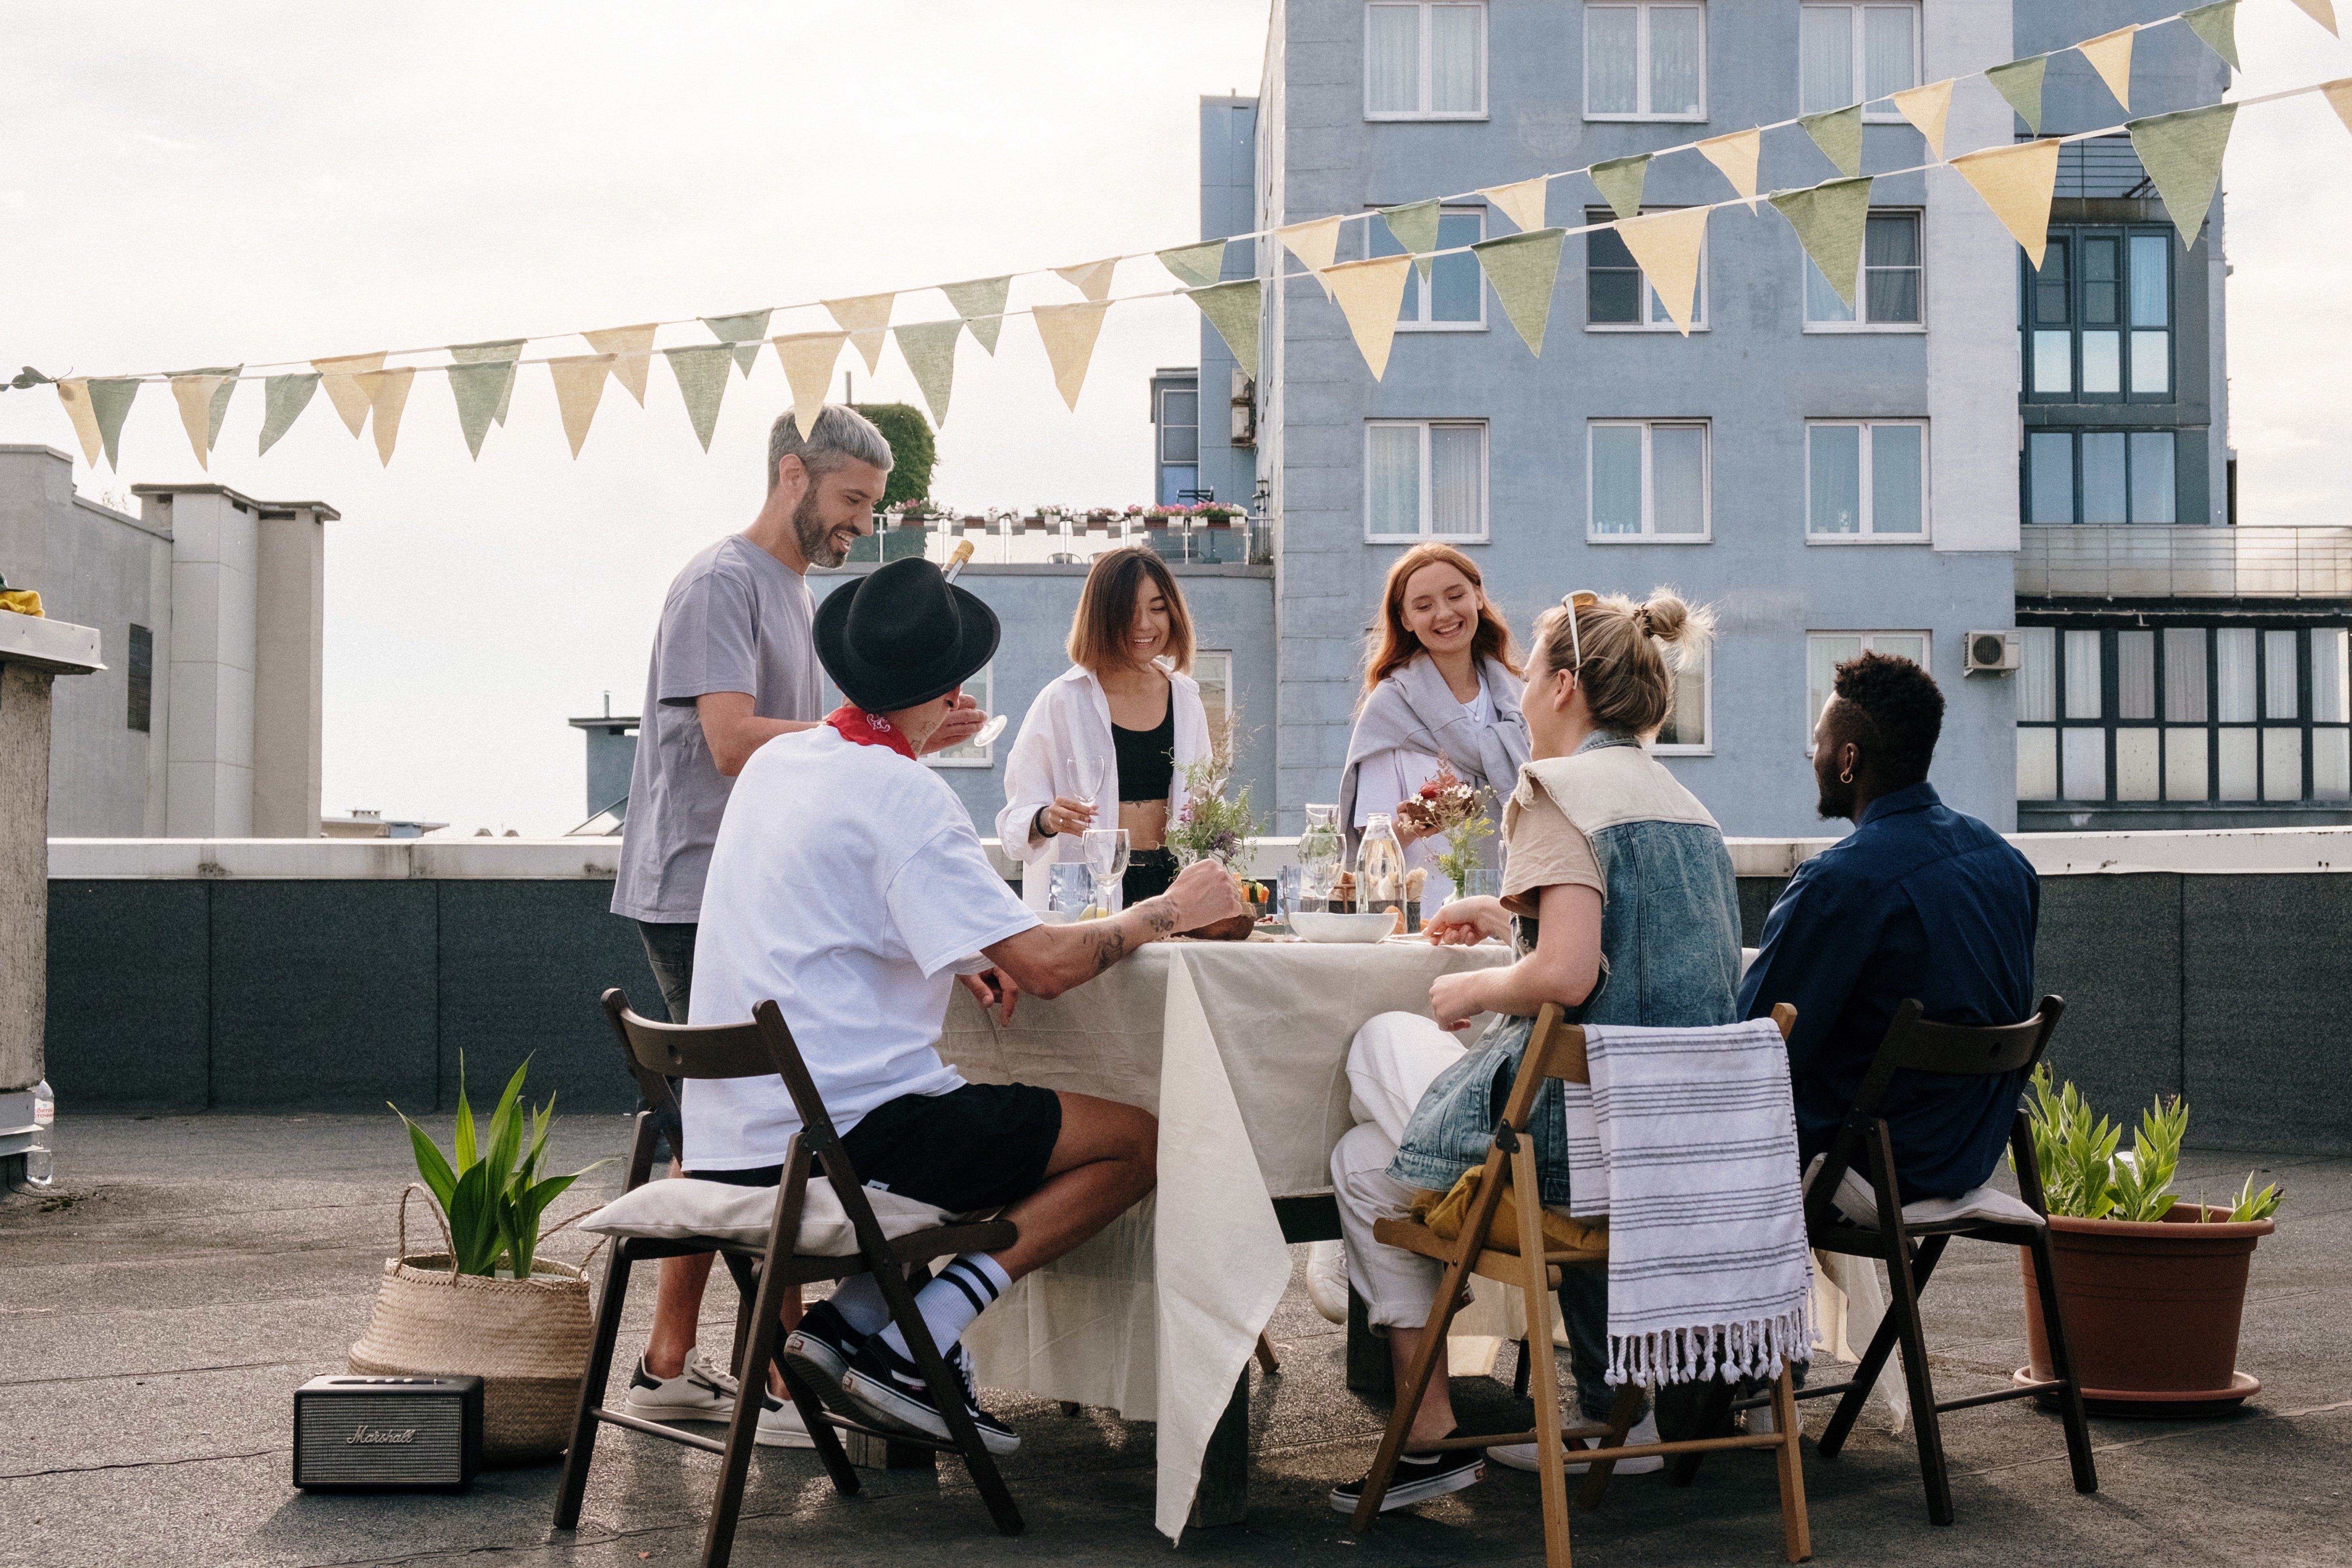 A roof top dinner party. | Pexels